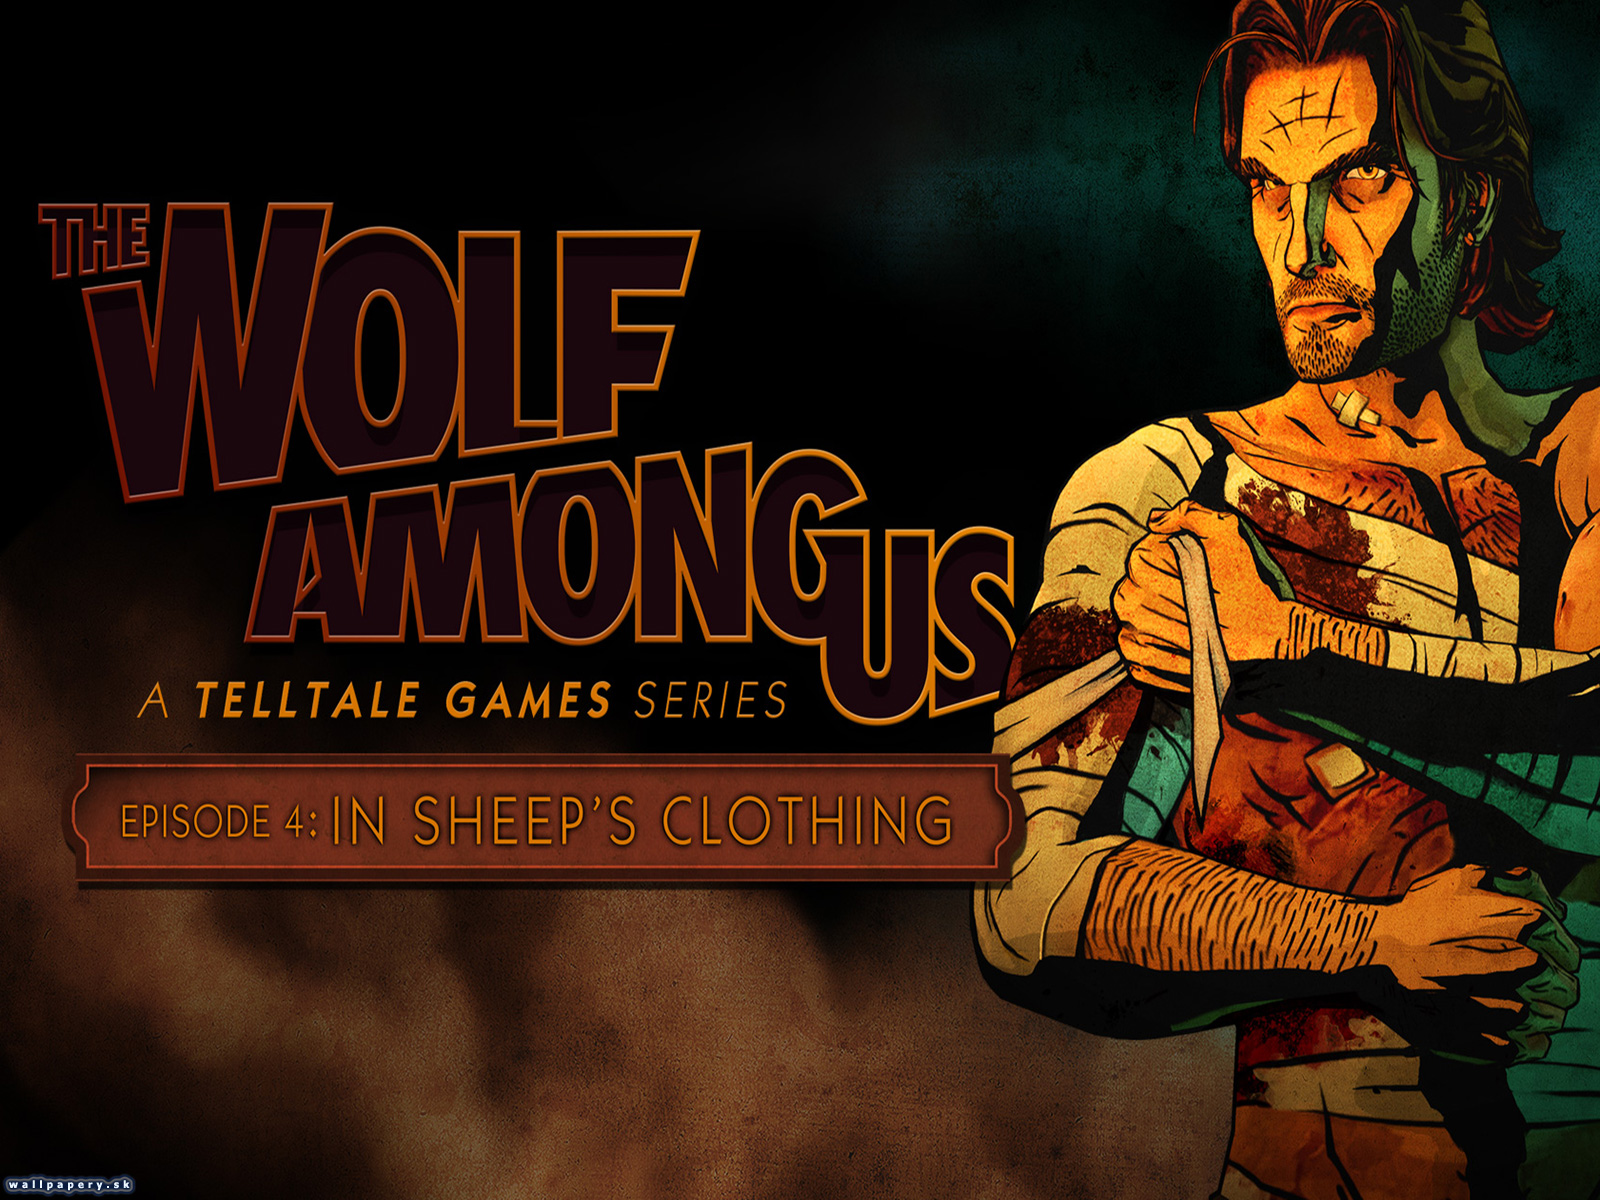 The Wolf Among Us - Episode 4: In Sheep's Clothing - wallpaper 1